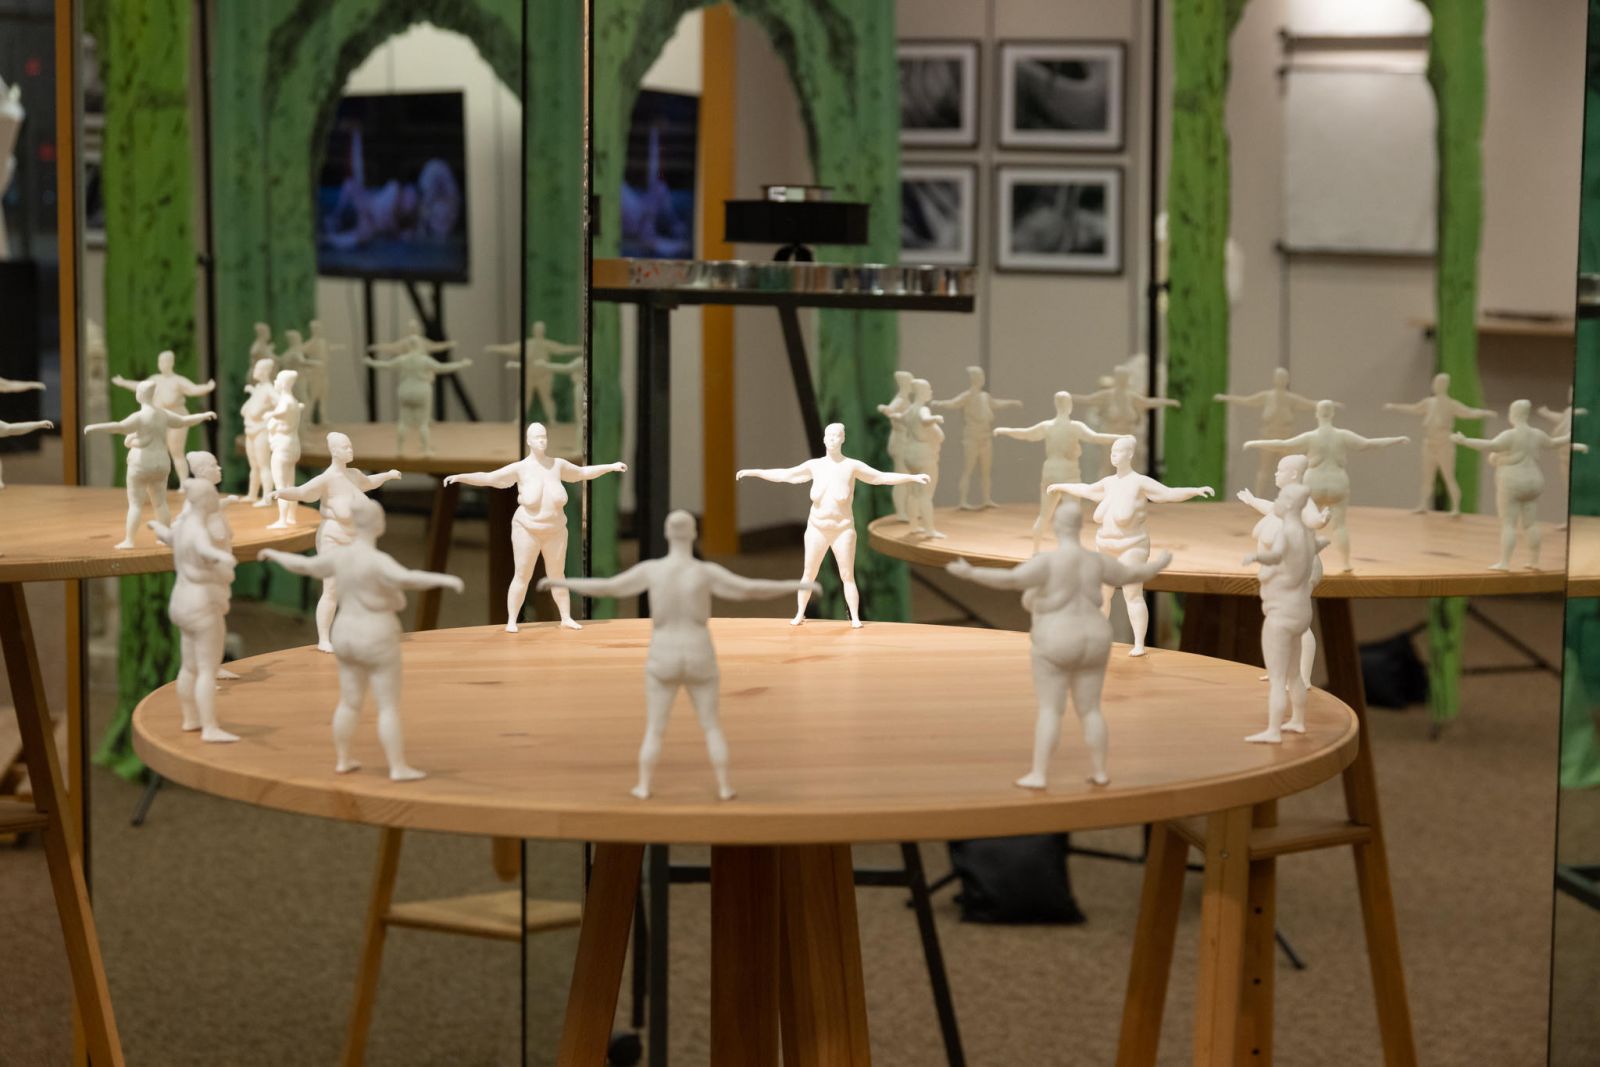 A series of round, wooden tables atop which stand small, white sculptures of nude women with their arms extended to the sides.